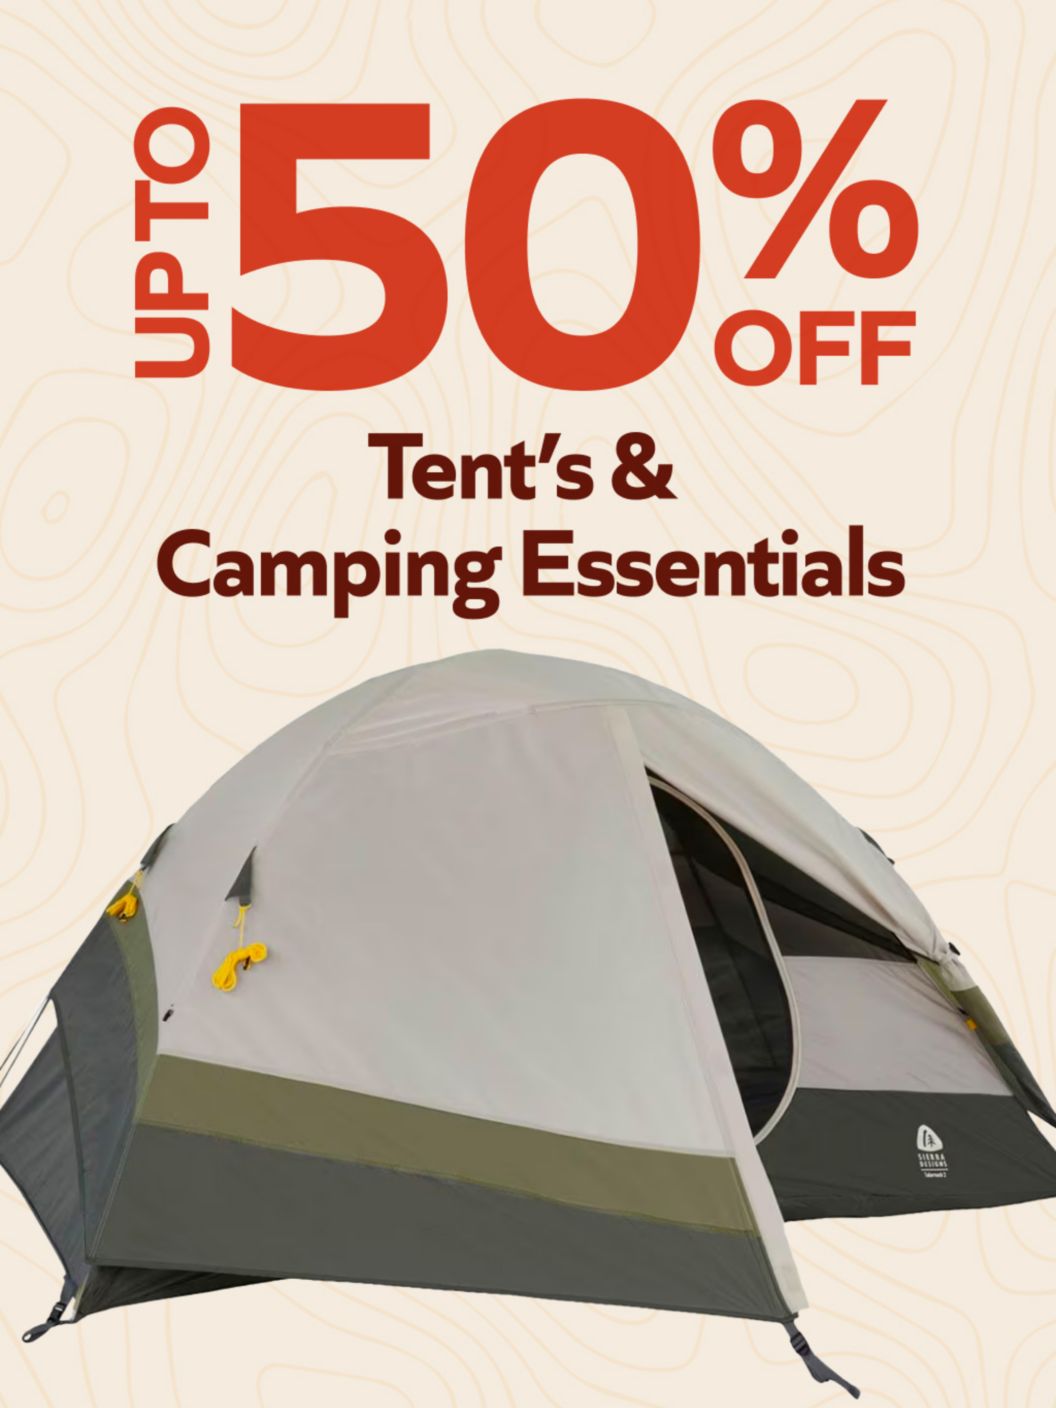 Tents & camping essentials up to 50% off.  